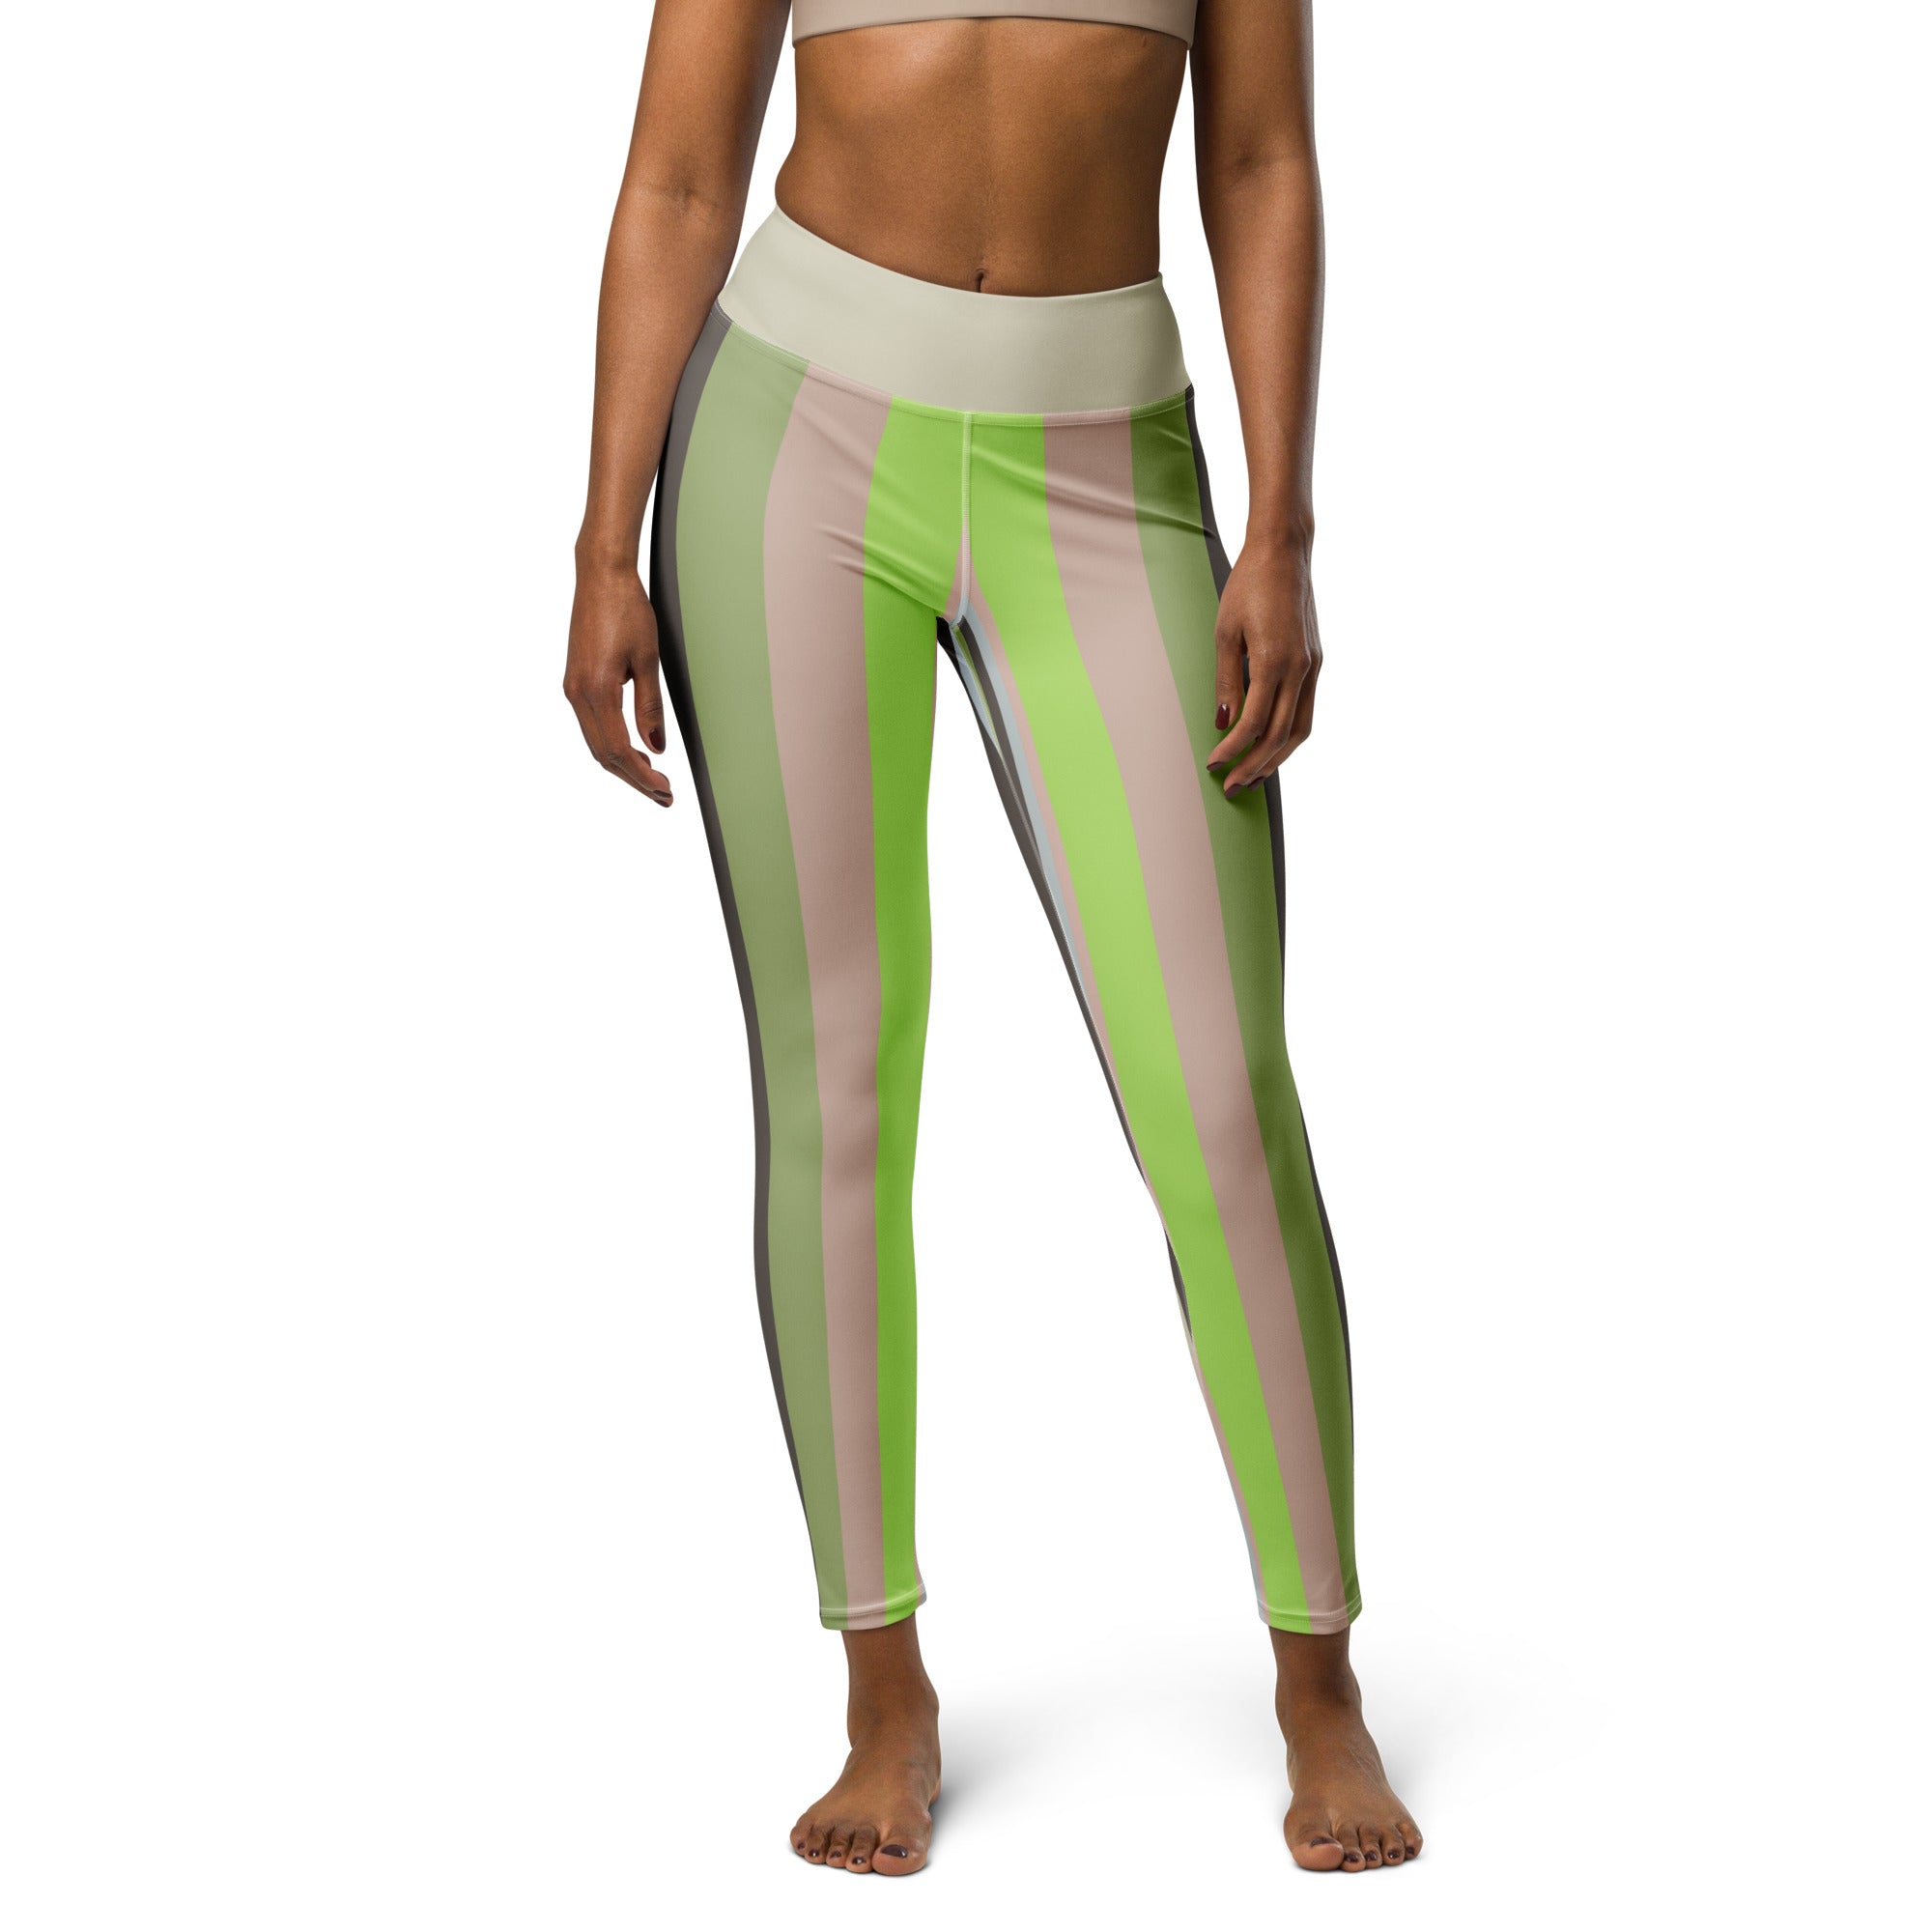 Elegant and durable Zen Garden patterned leggings, supporting your yoga poses in style.